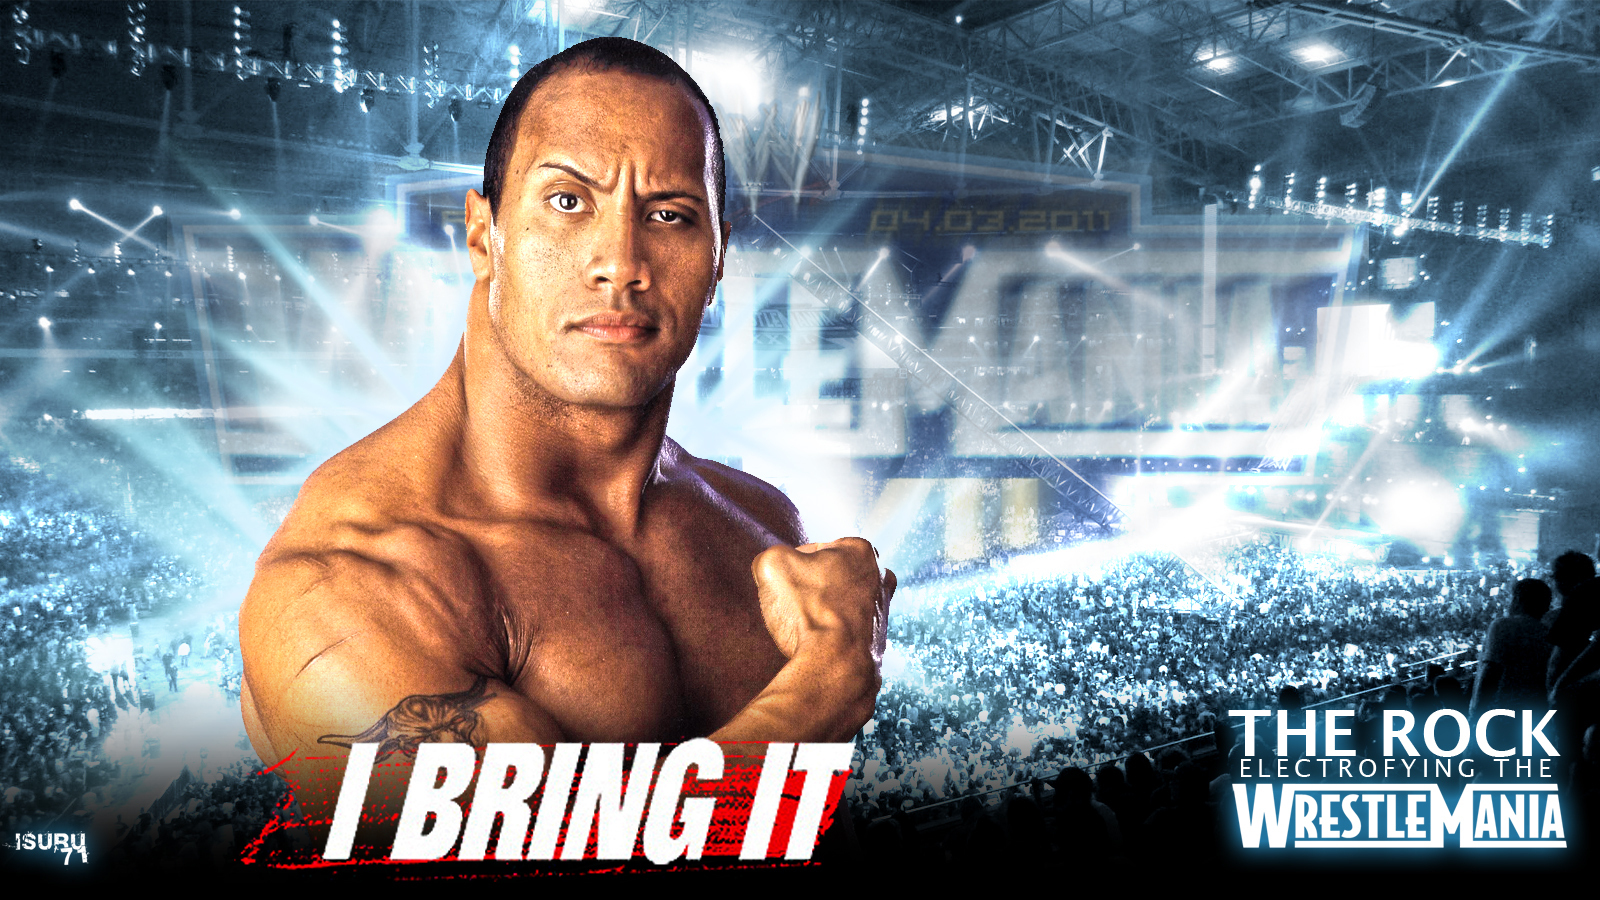 the rock wallpapers wwe,movie,professional wrestling,muscle,poster,wrestler